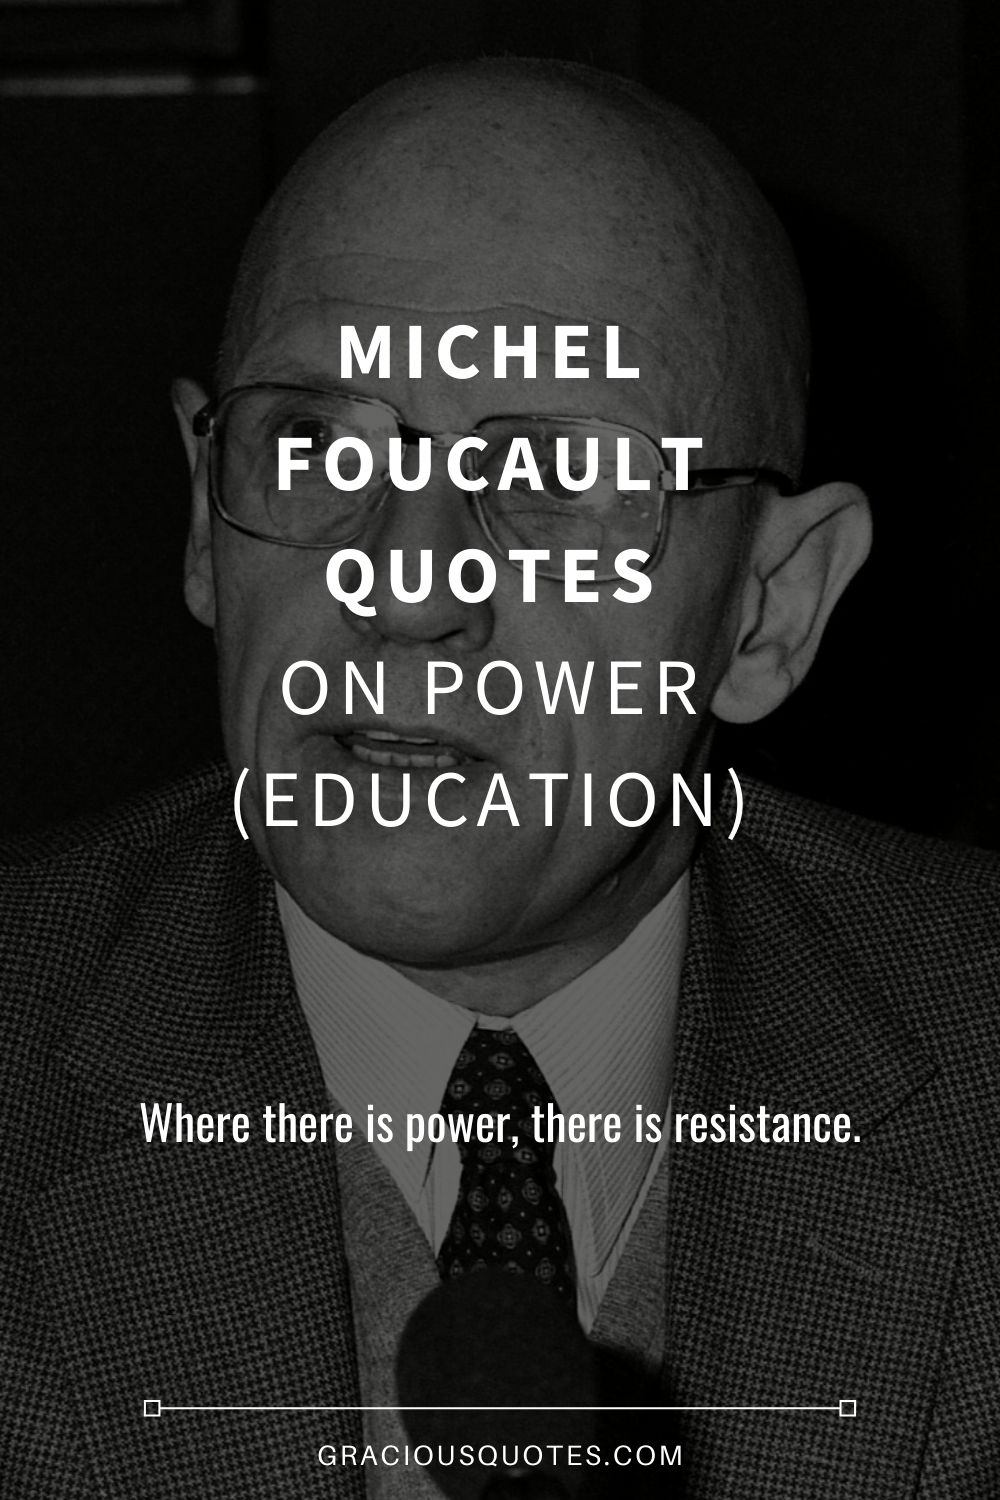 education is power quote